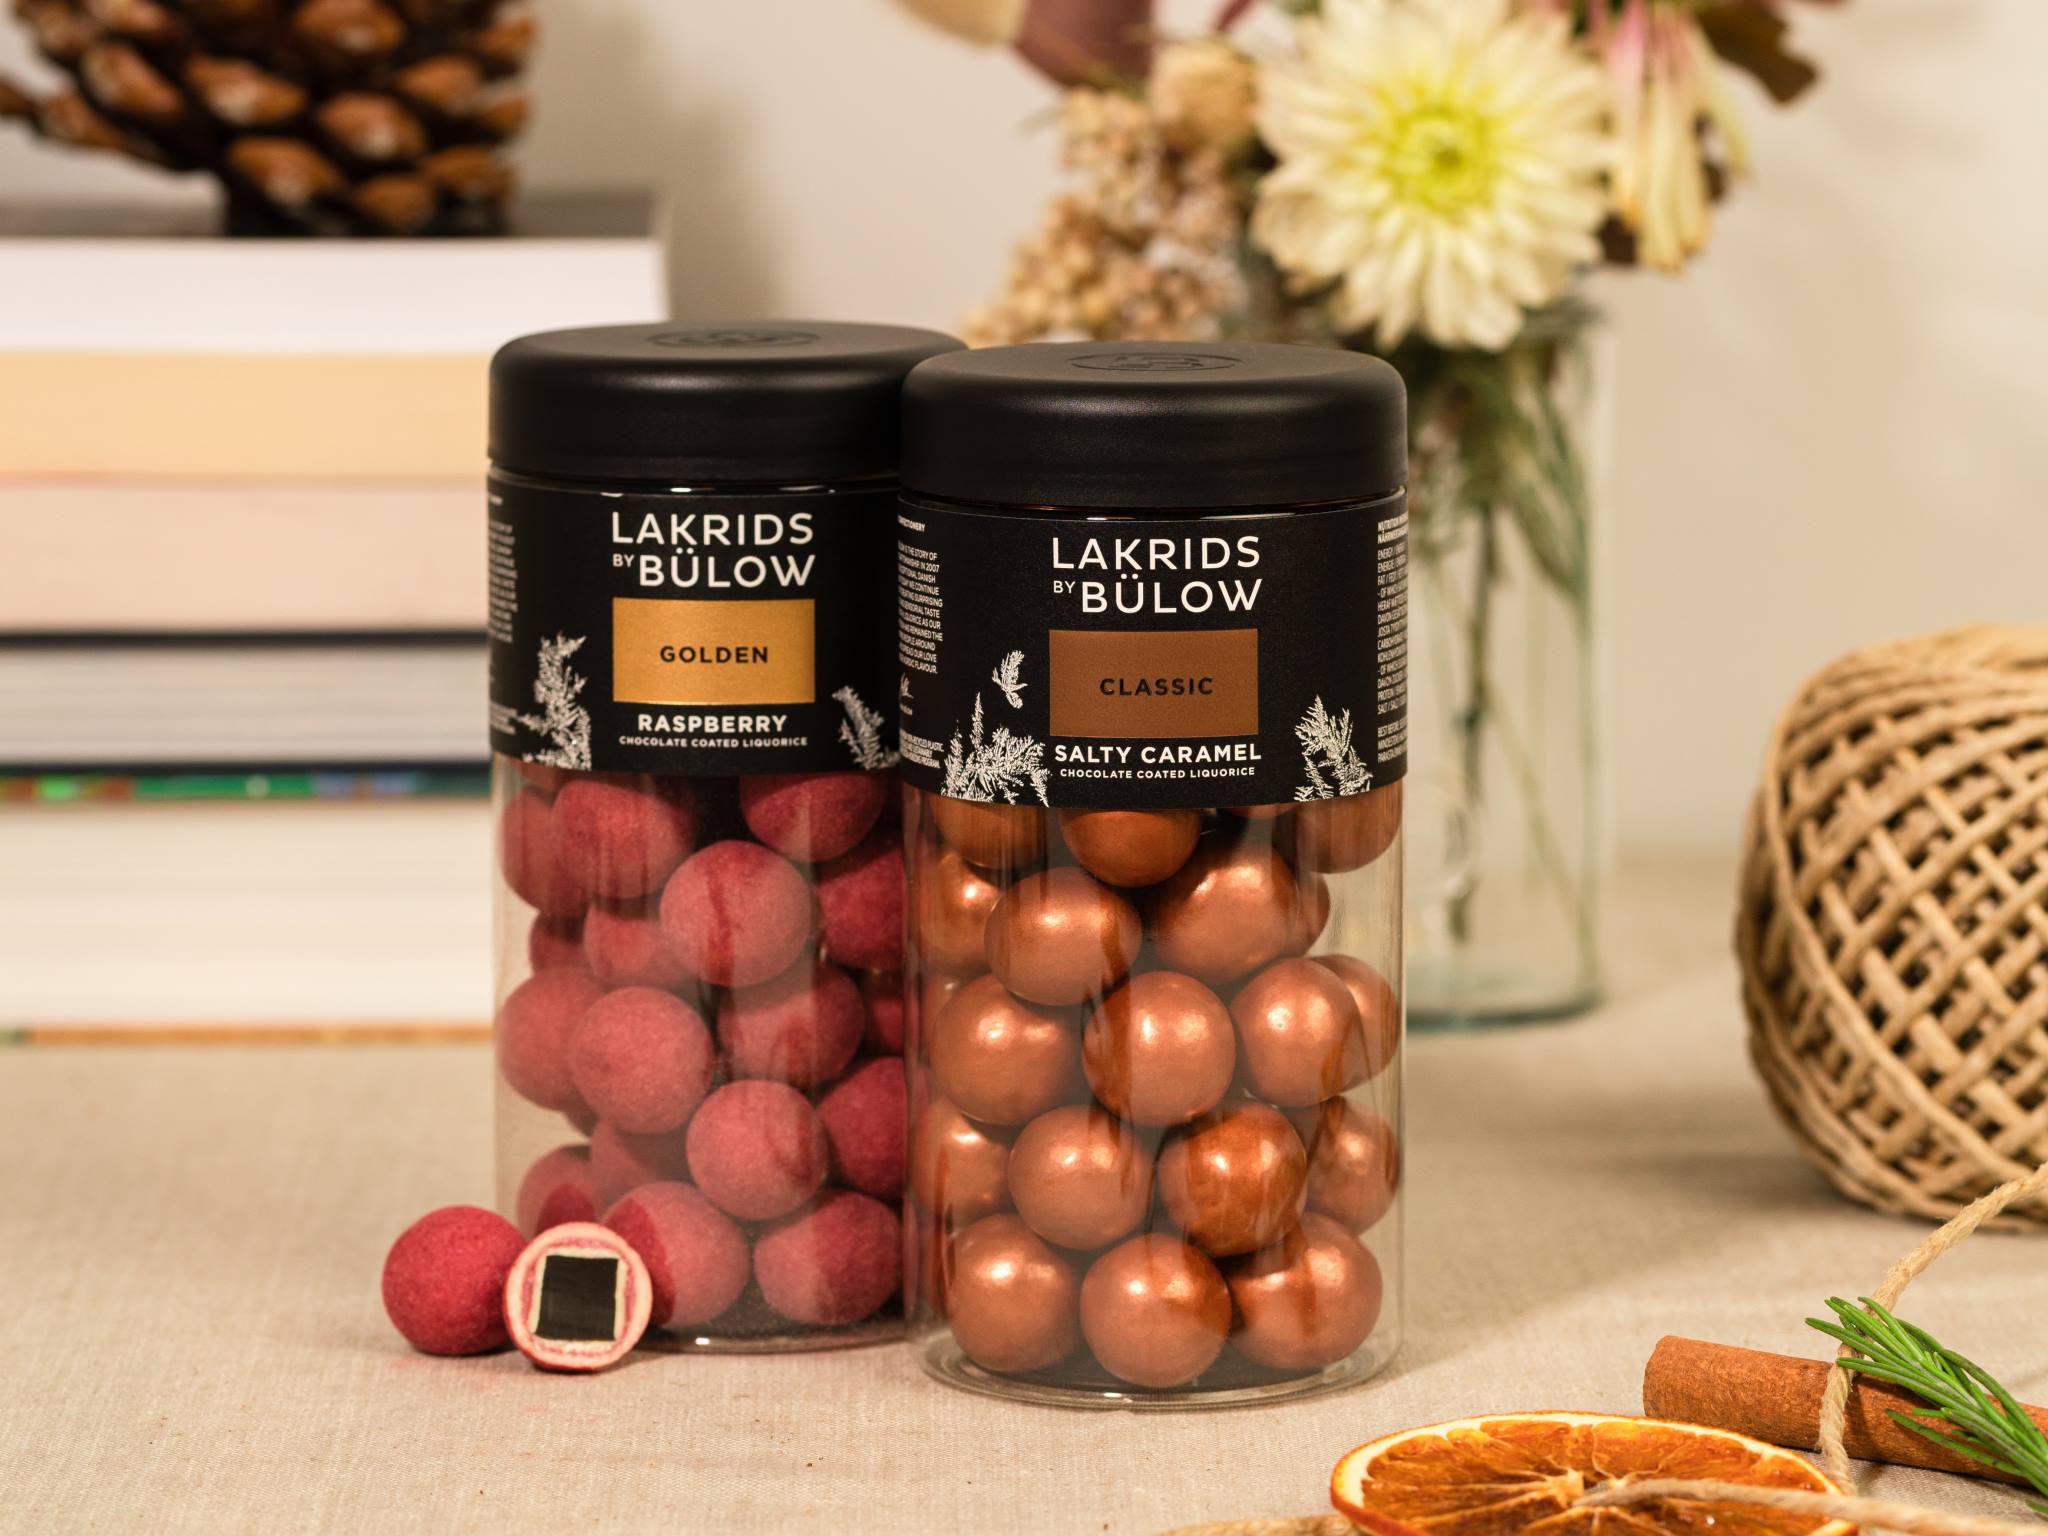 Lakrids by Bülow Limited Editions - Chocolate coated liquorice - Official UK retailer